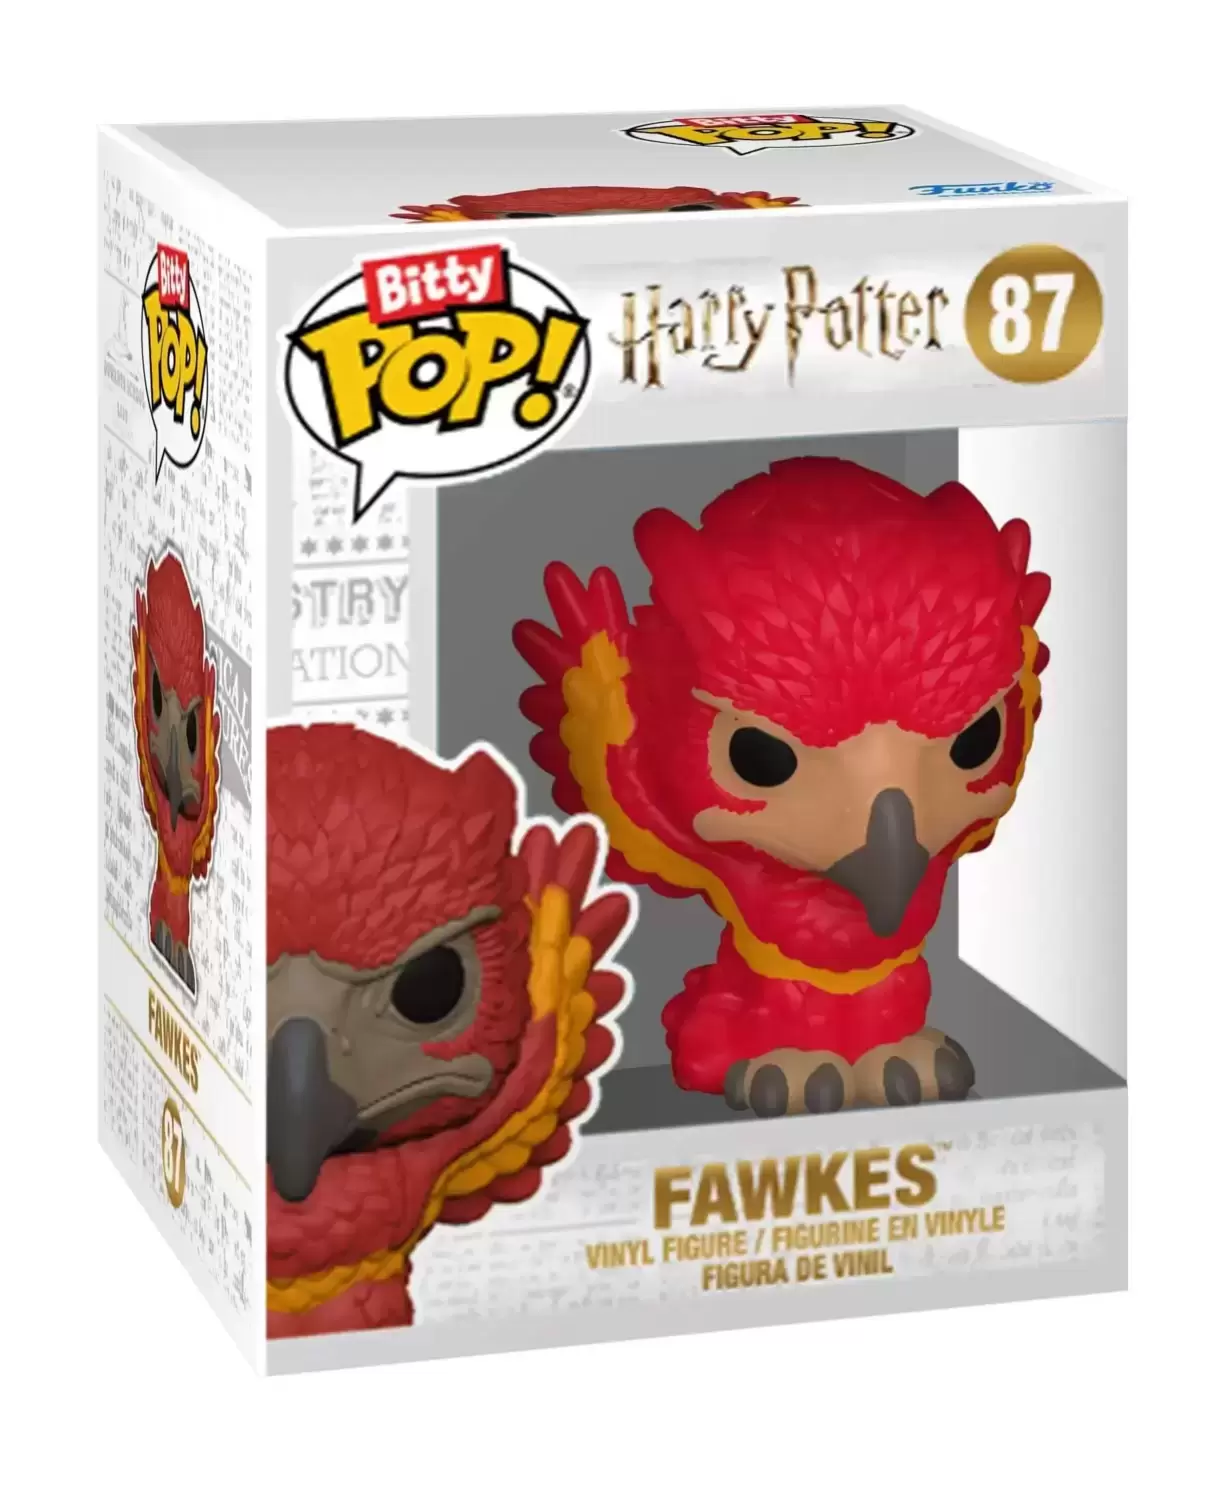 Bitty POP! - Harry Potter - Fawkes